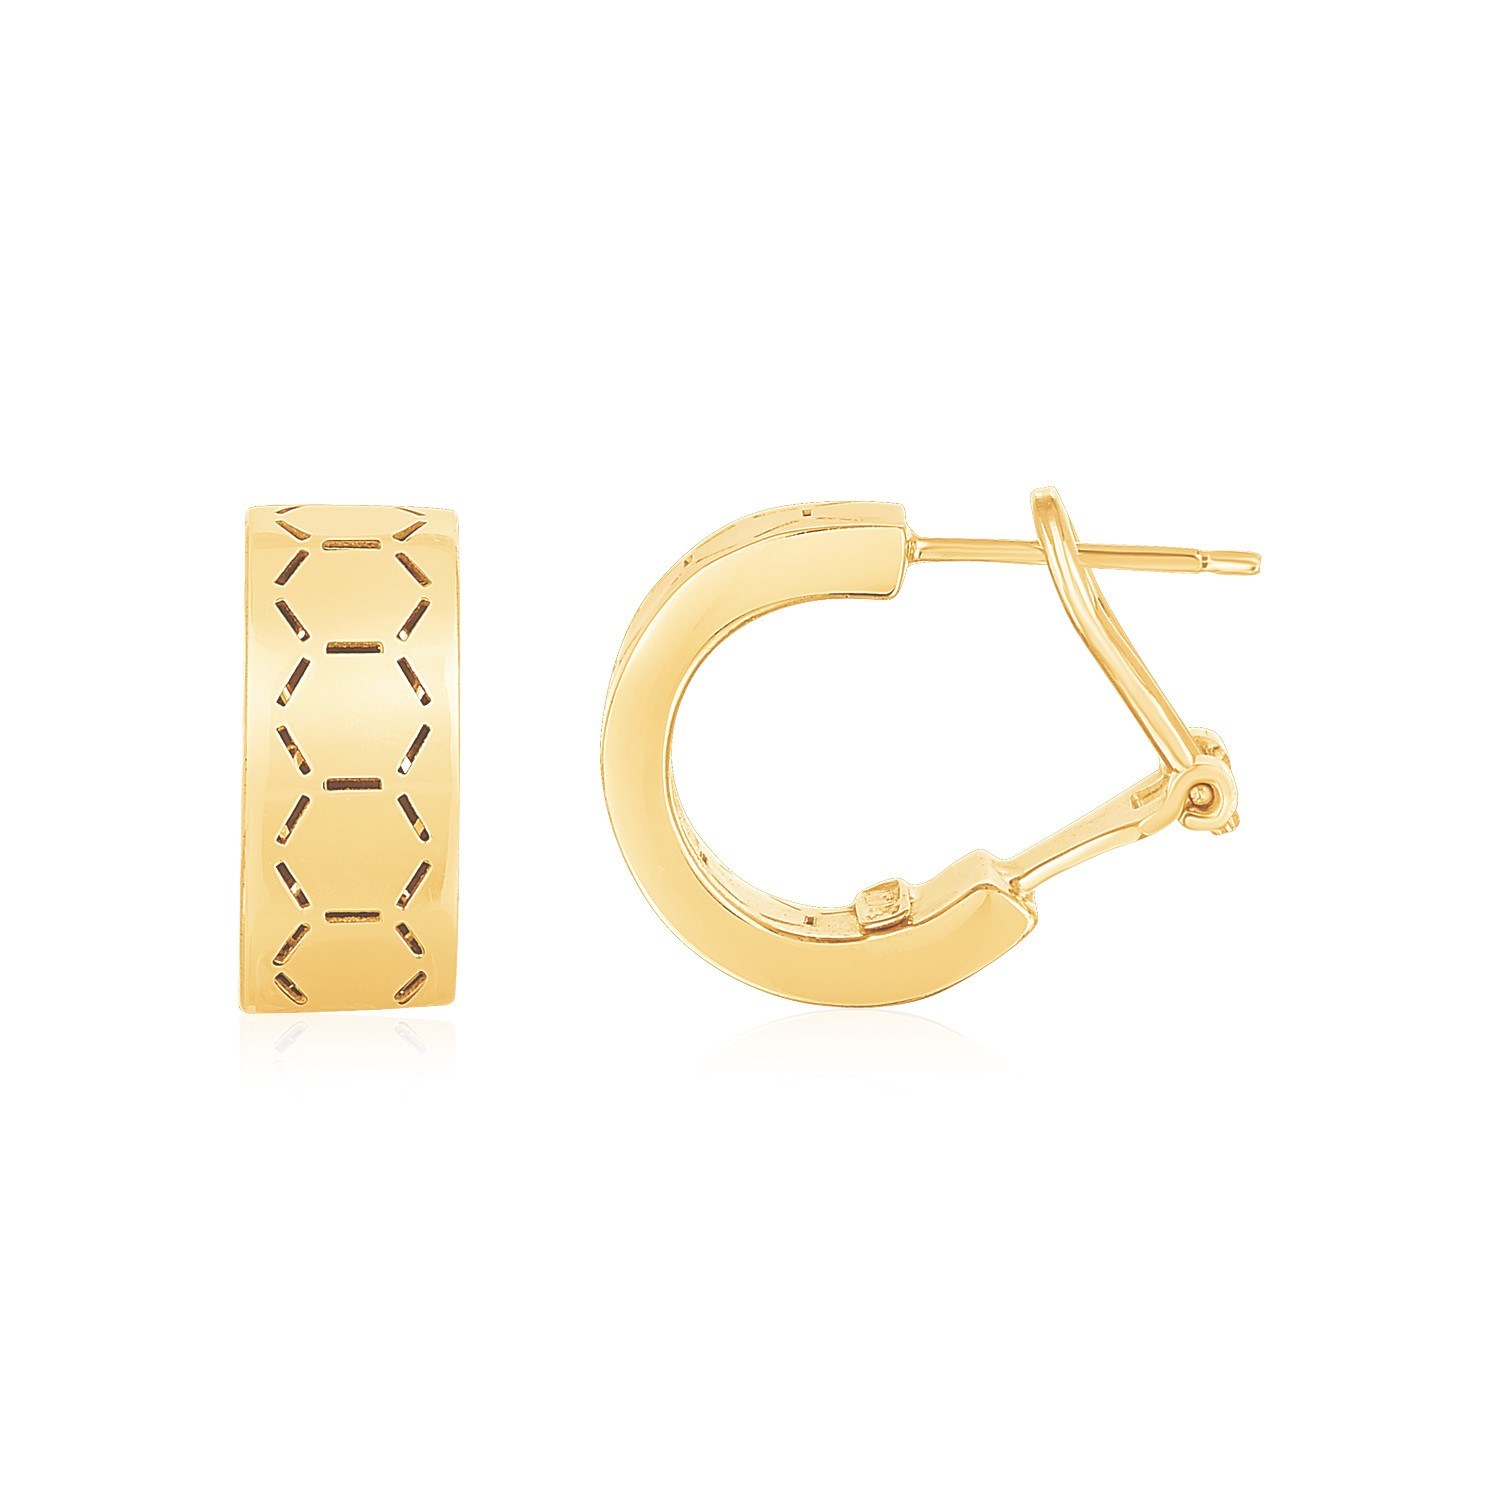 14K Yellow Gold High Polish Honeycomb Patterned Hoops